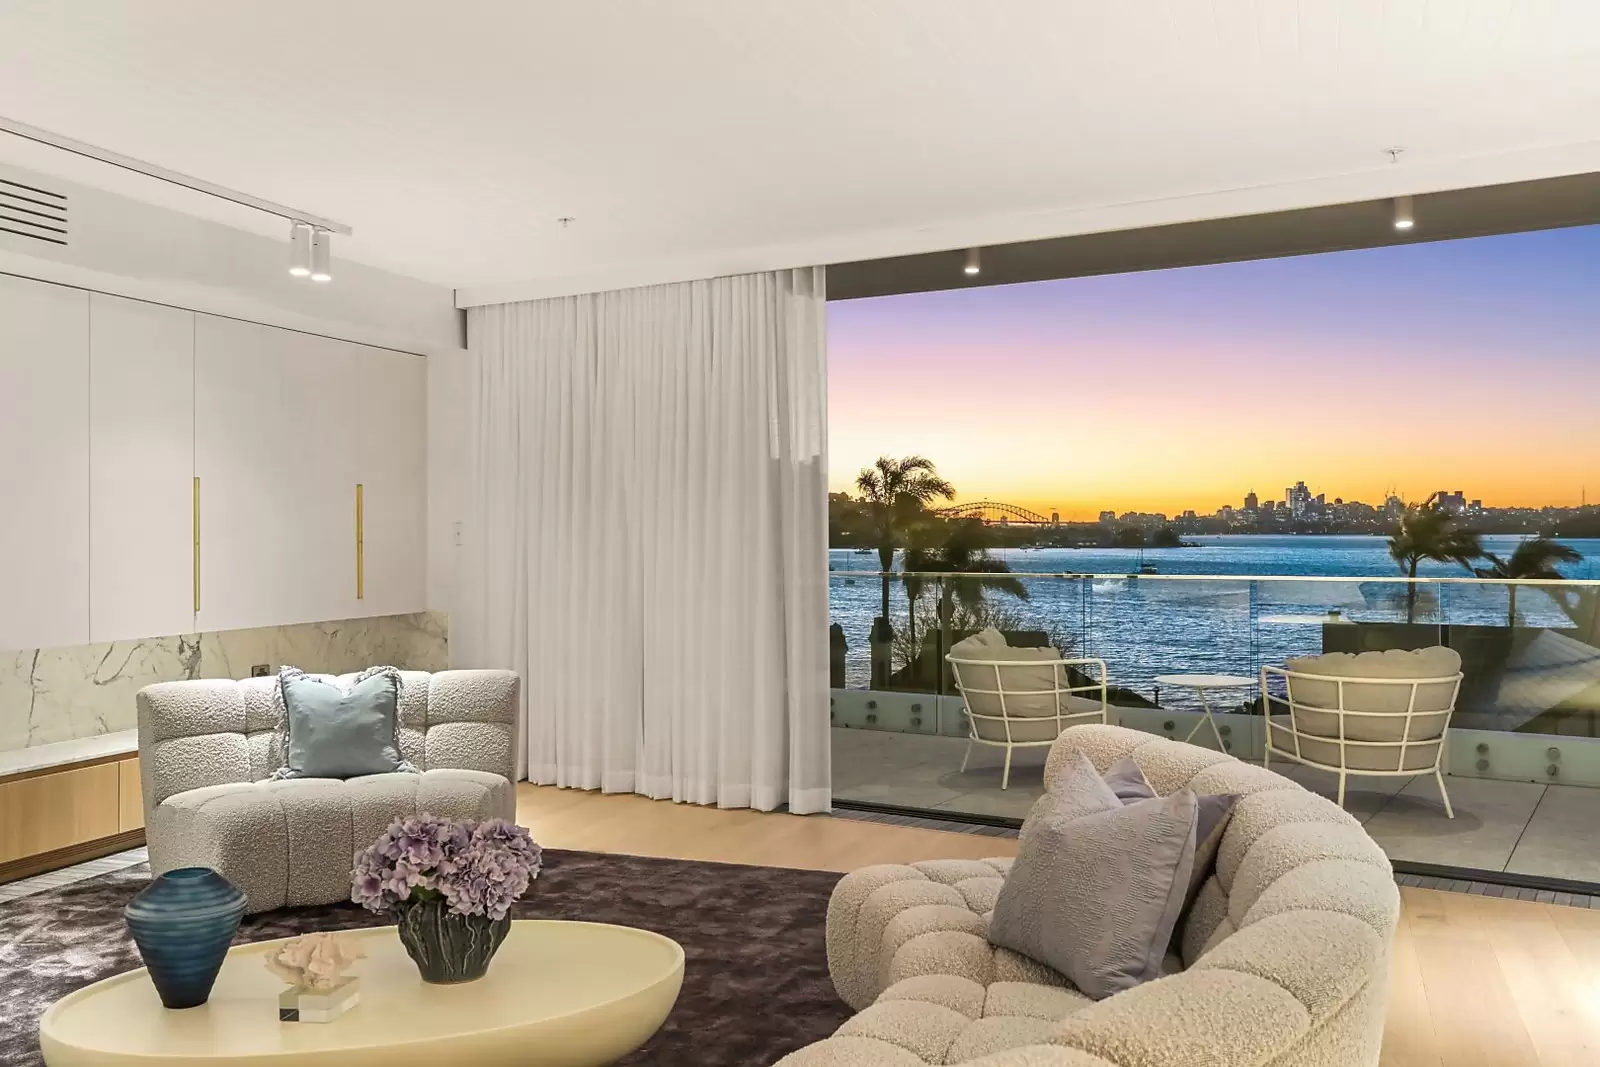 Photo #4: Penthouse /722 New South Head Road, Rose Bay - For Sale by Sydney Sotheby's International Realty